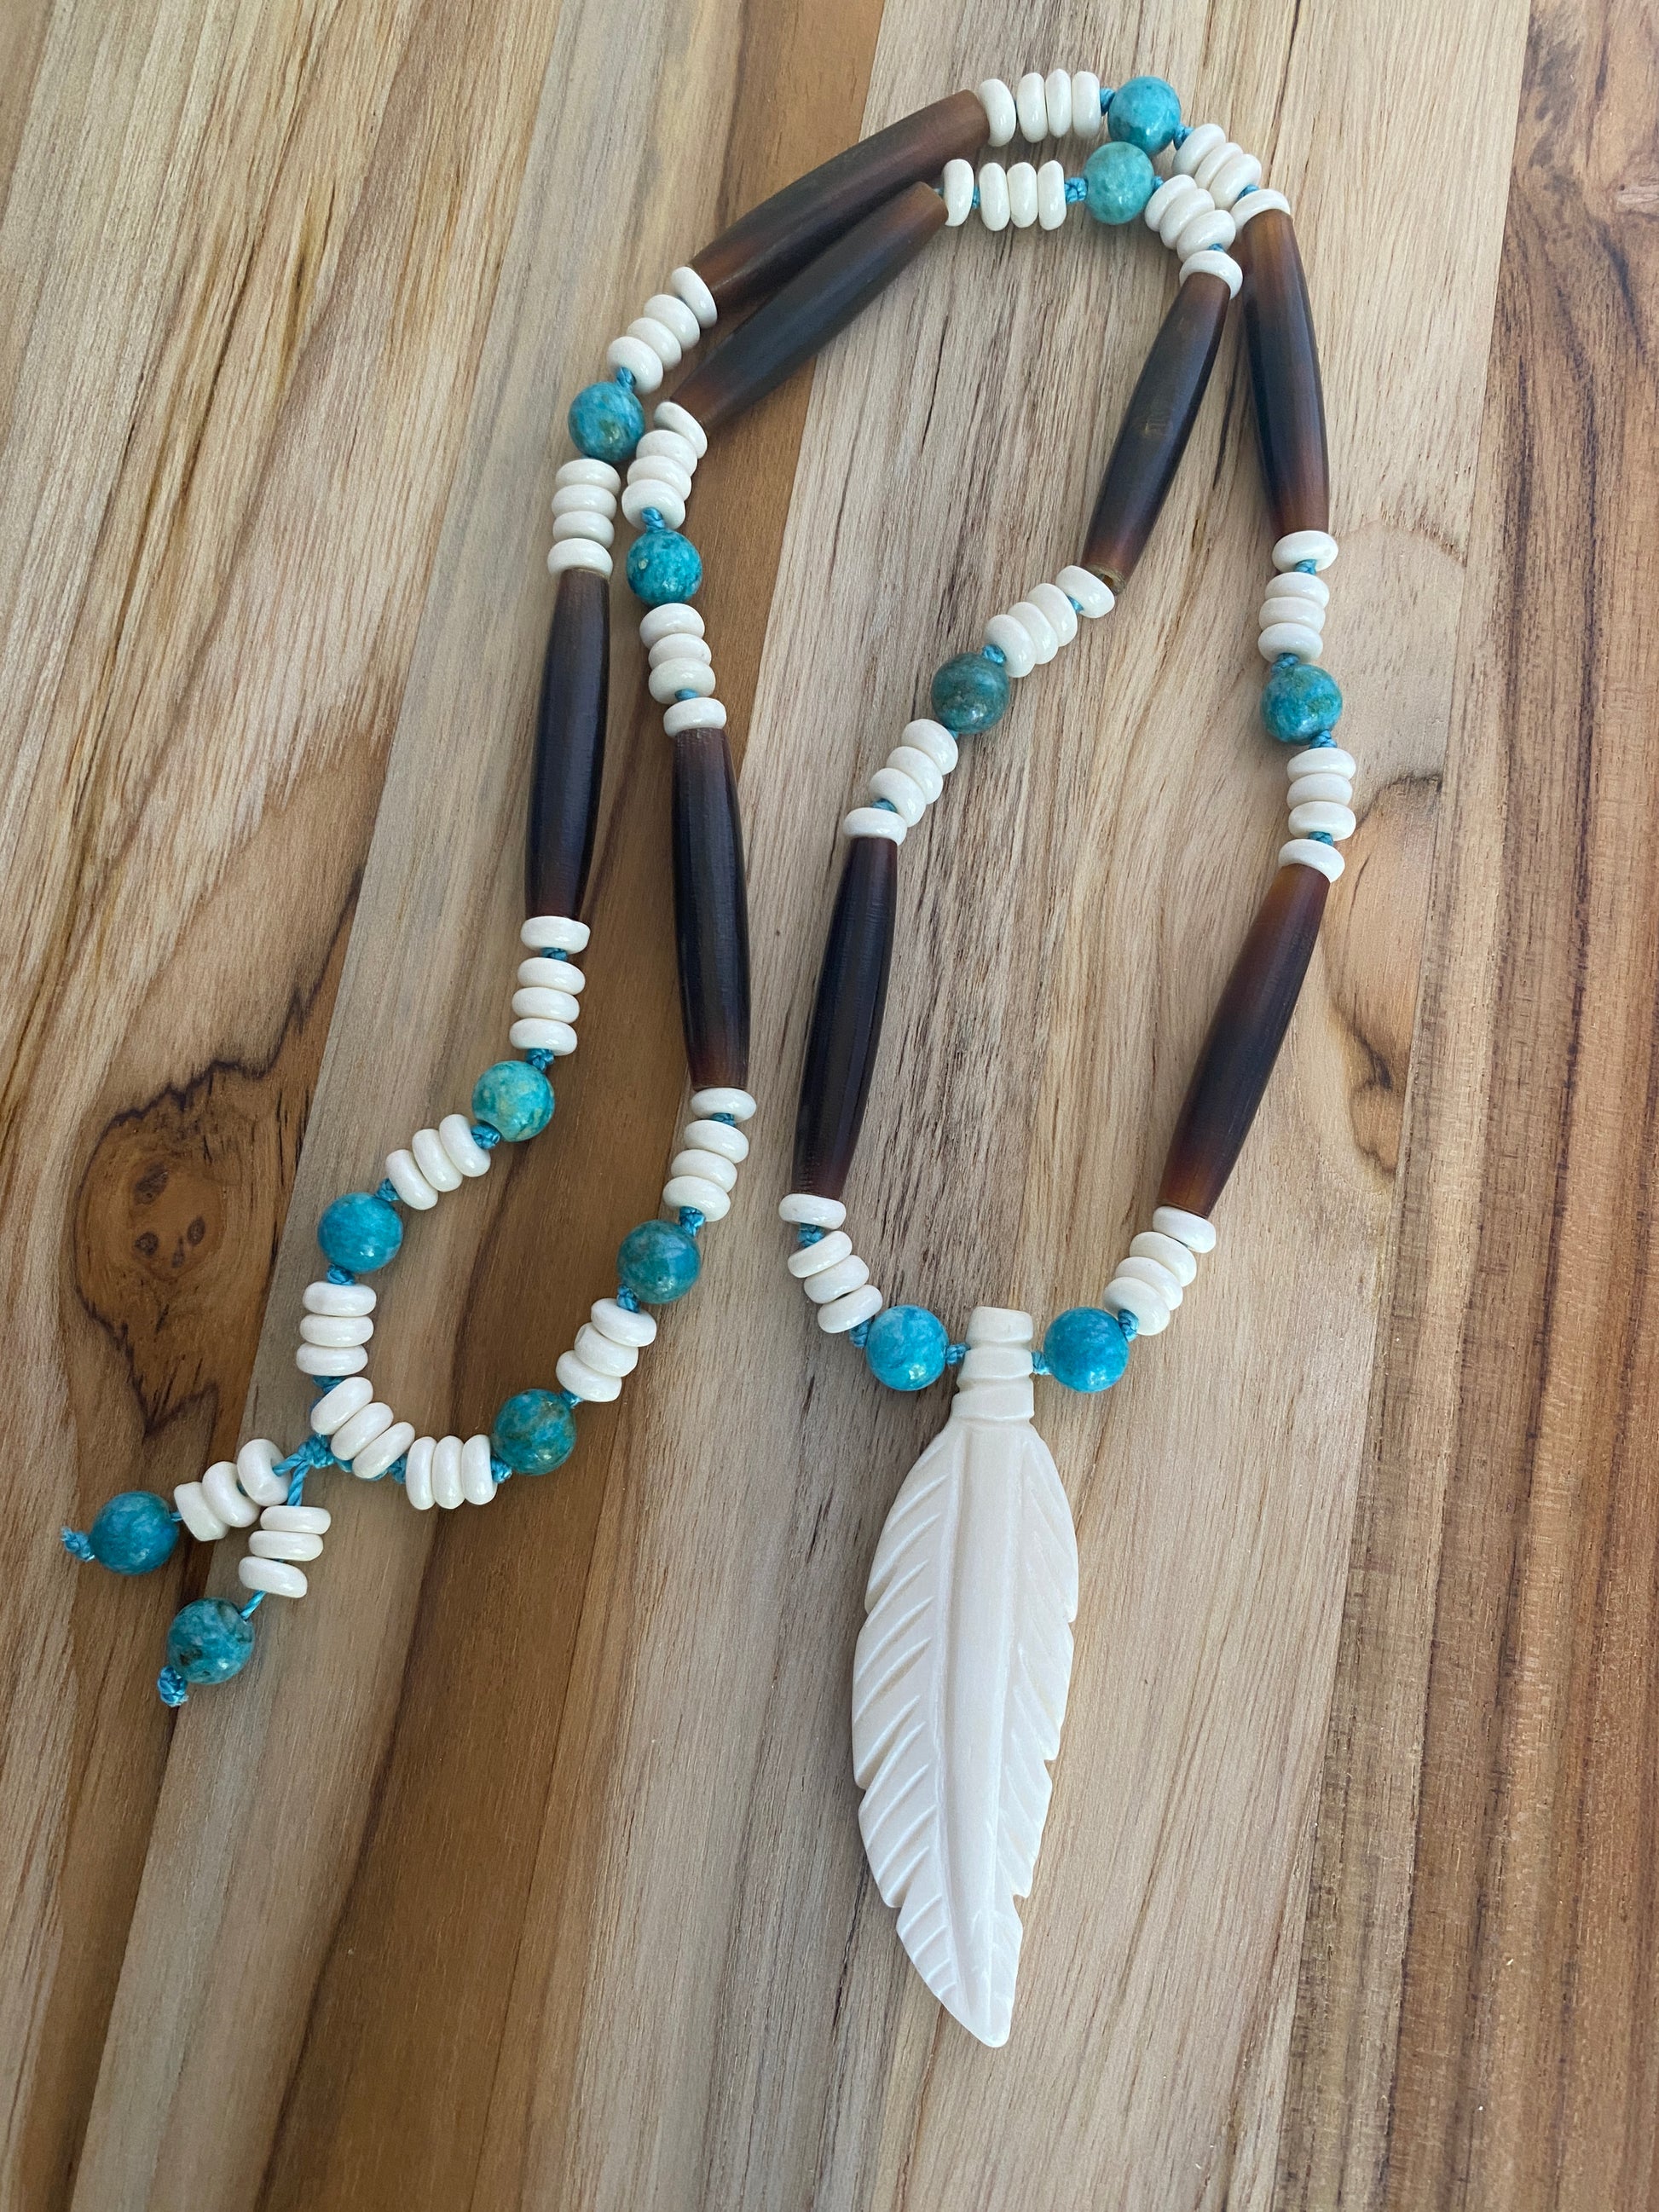 28" Long White Bone Feather Necklace with Brown Hairpipes & Turquoise Beads - My Urban Gems